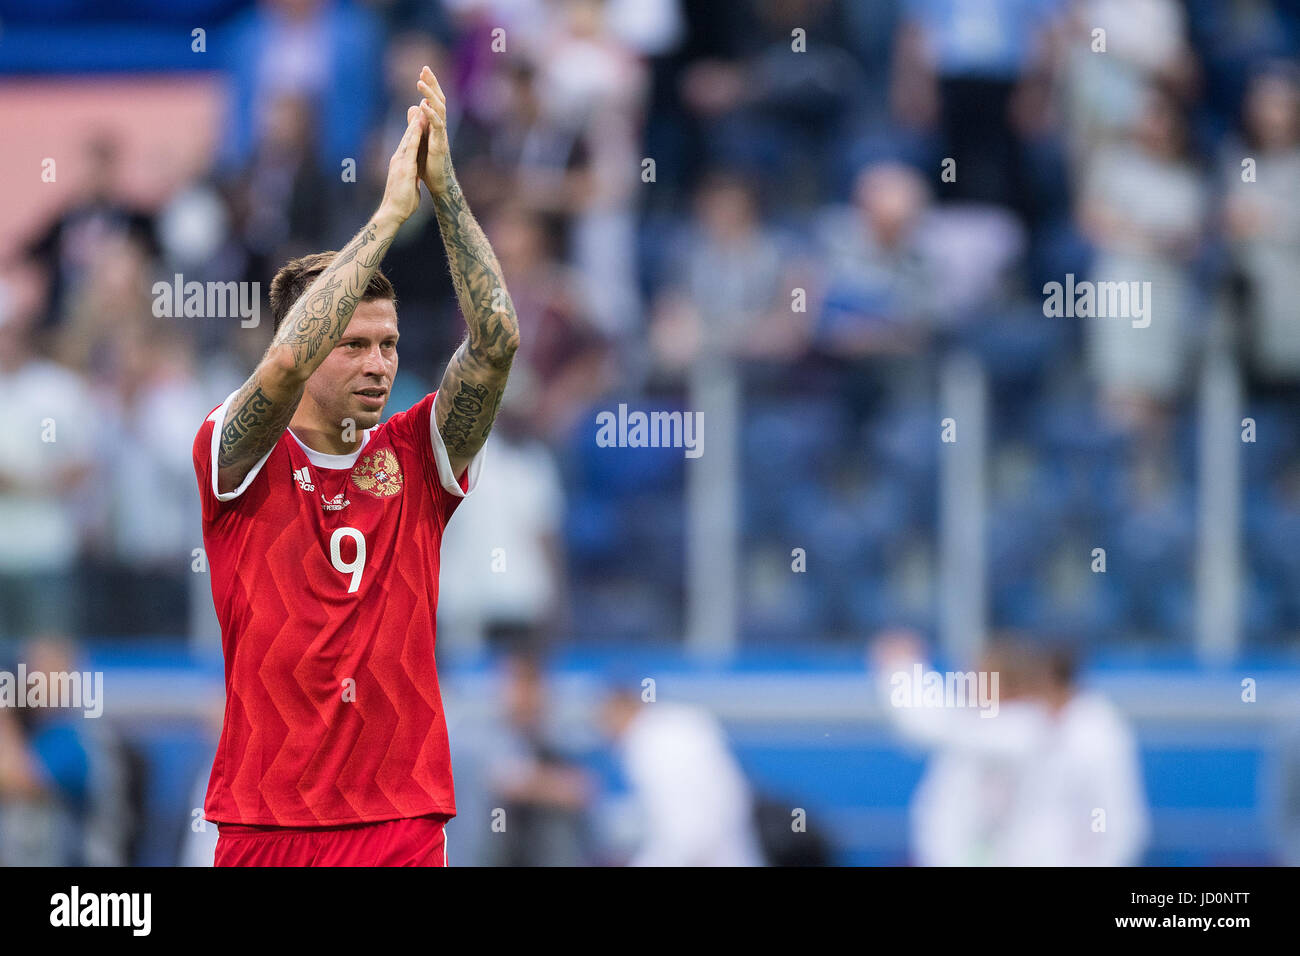 Saint Petersburg, Russia. 17th June, 2017. Russia's Fedor Smolov thanks the fans after the Confederations Cup Group A soccer match between Russia and New Zealand at the stadium in Saint Petersburg, Russia, 17 June 2017. Photo: Marius Becker/dpa/Alamy Live News Stock Photo